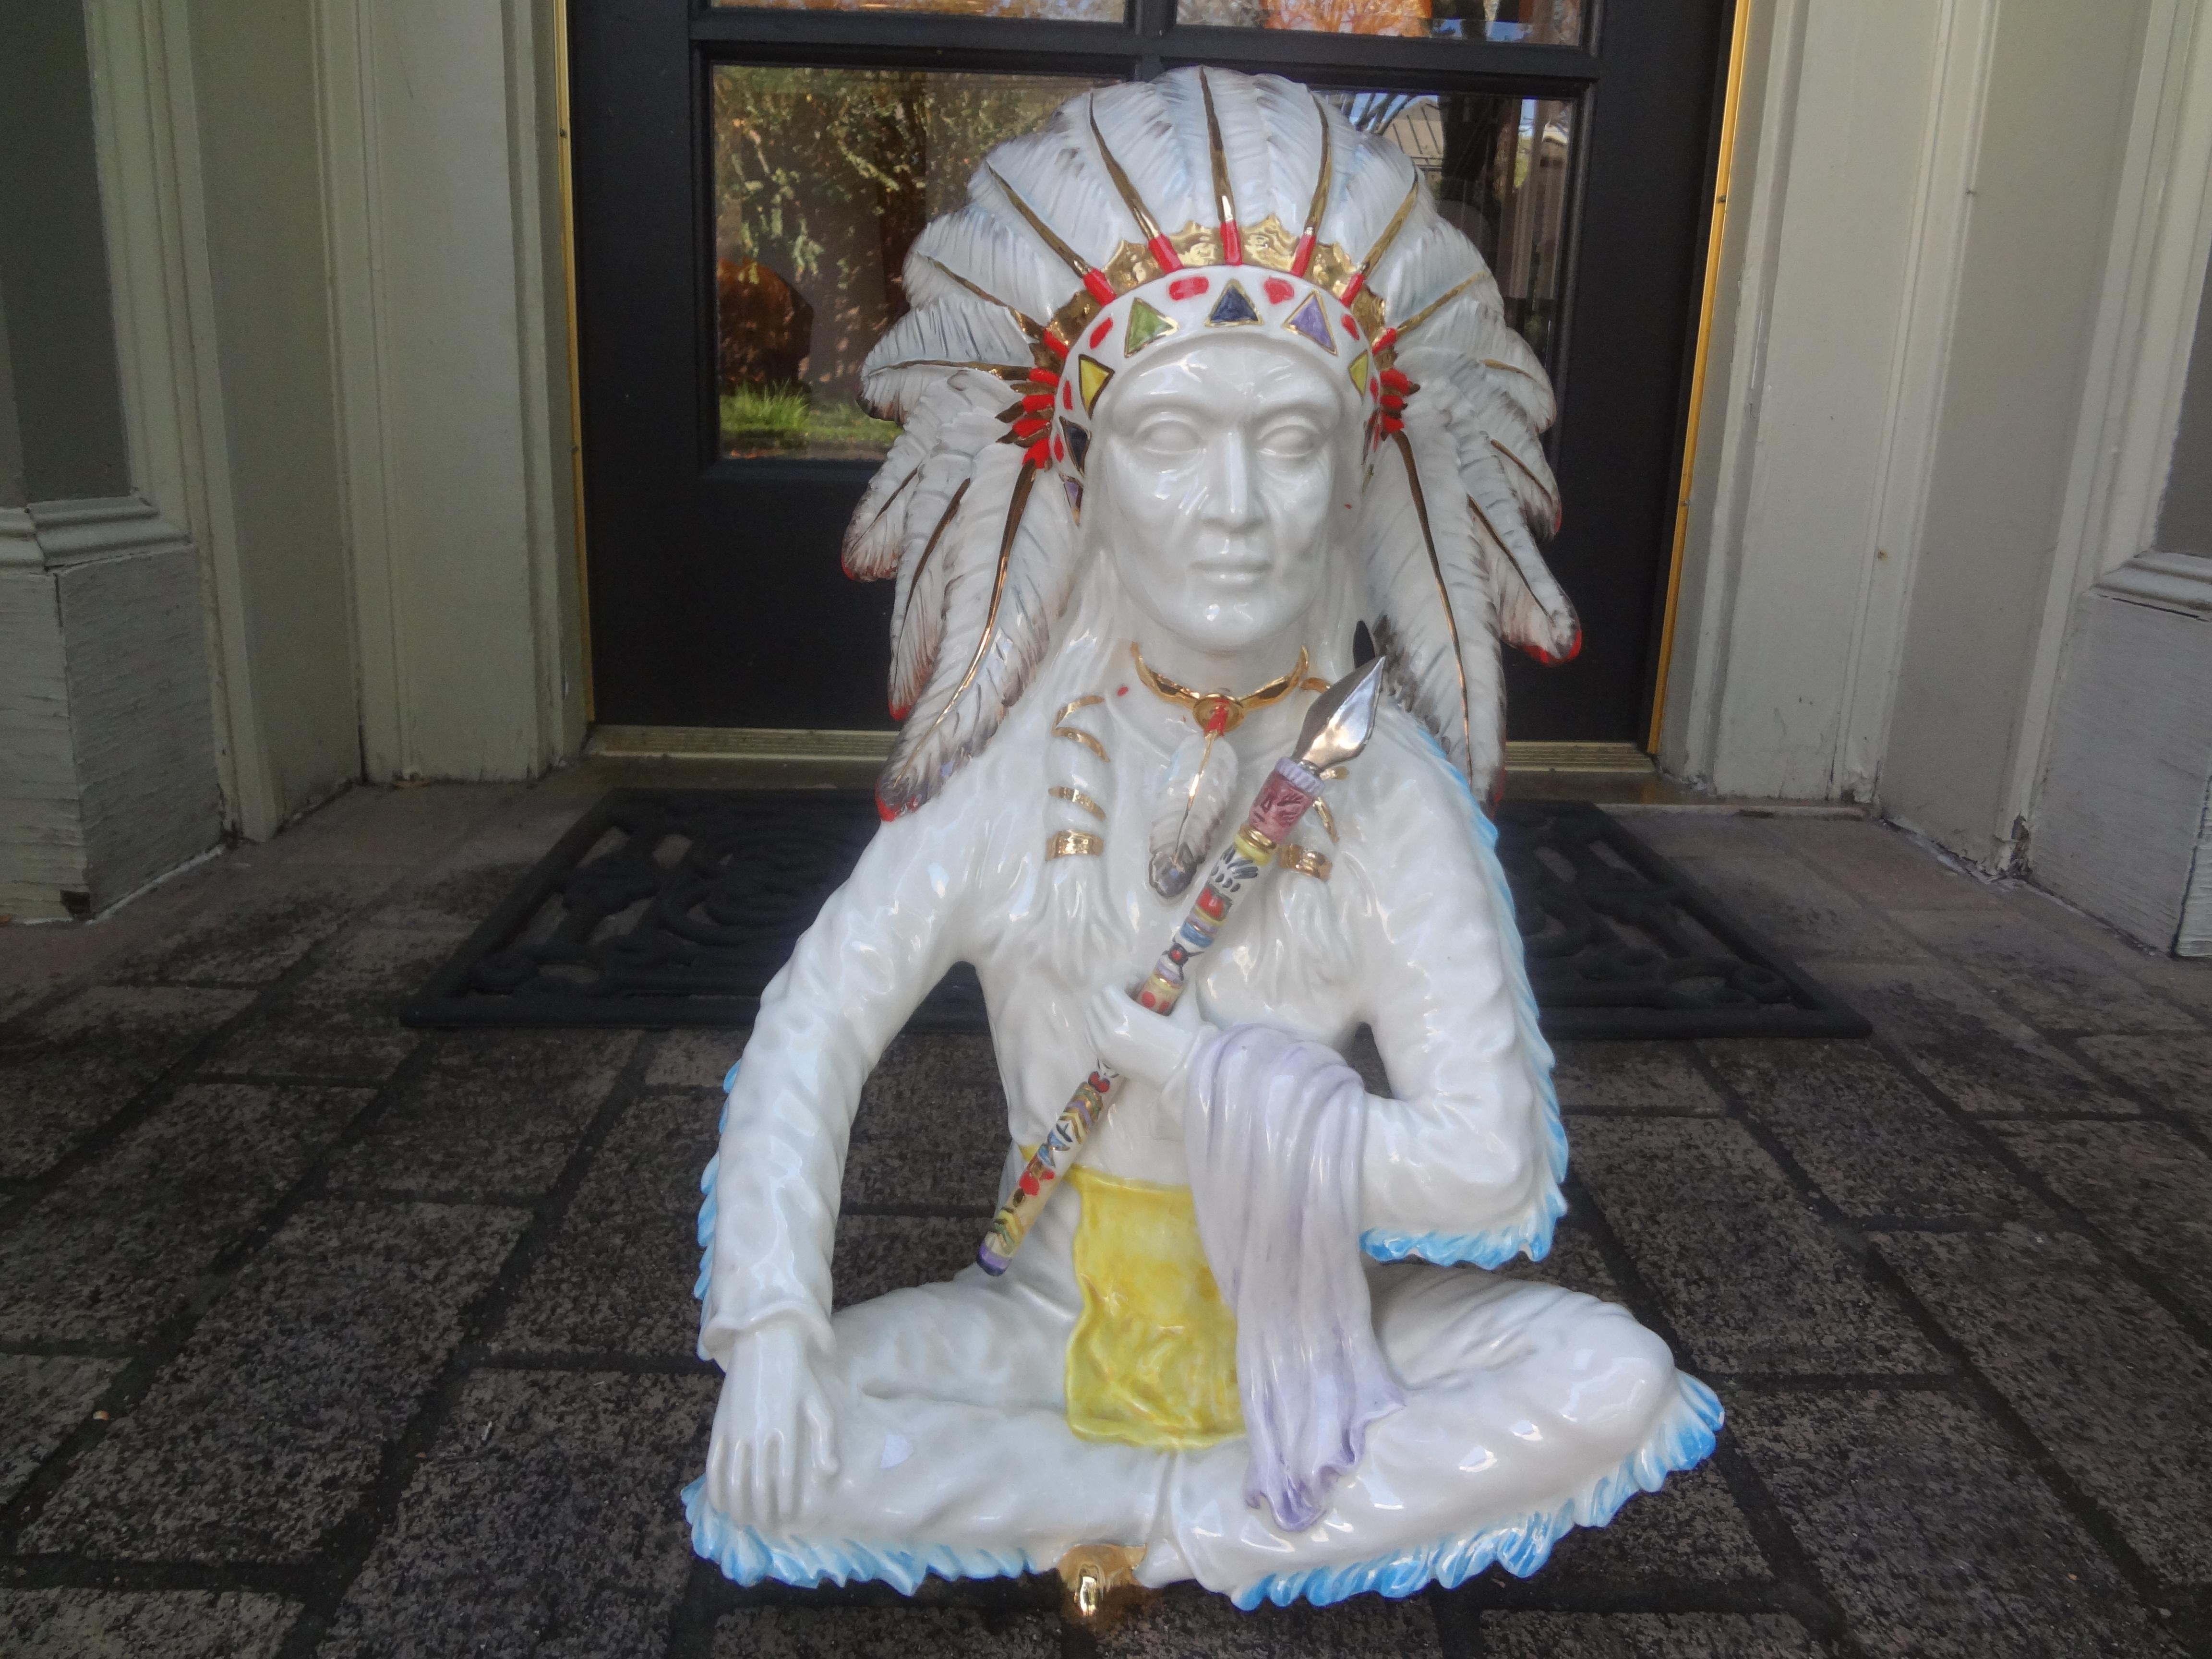 Italian Hollywood Regency Ceramic Indian Chief.
This interesting vintage Italian ceramic sculpture or figure depicts an Indian chief with a beautiful headdress in a seated position.